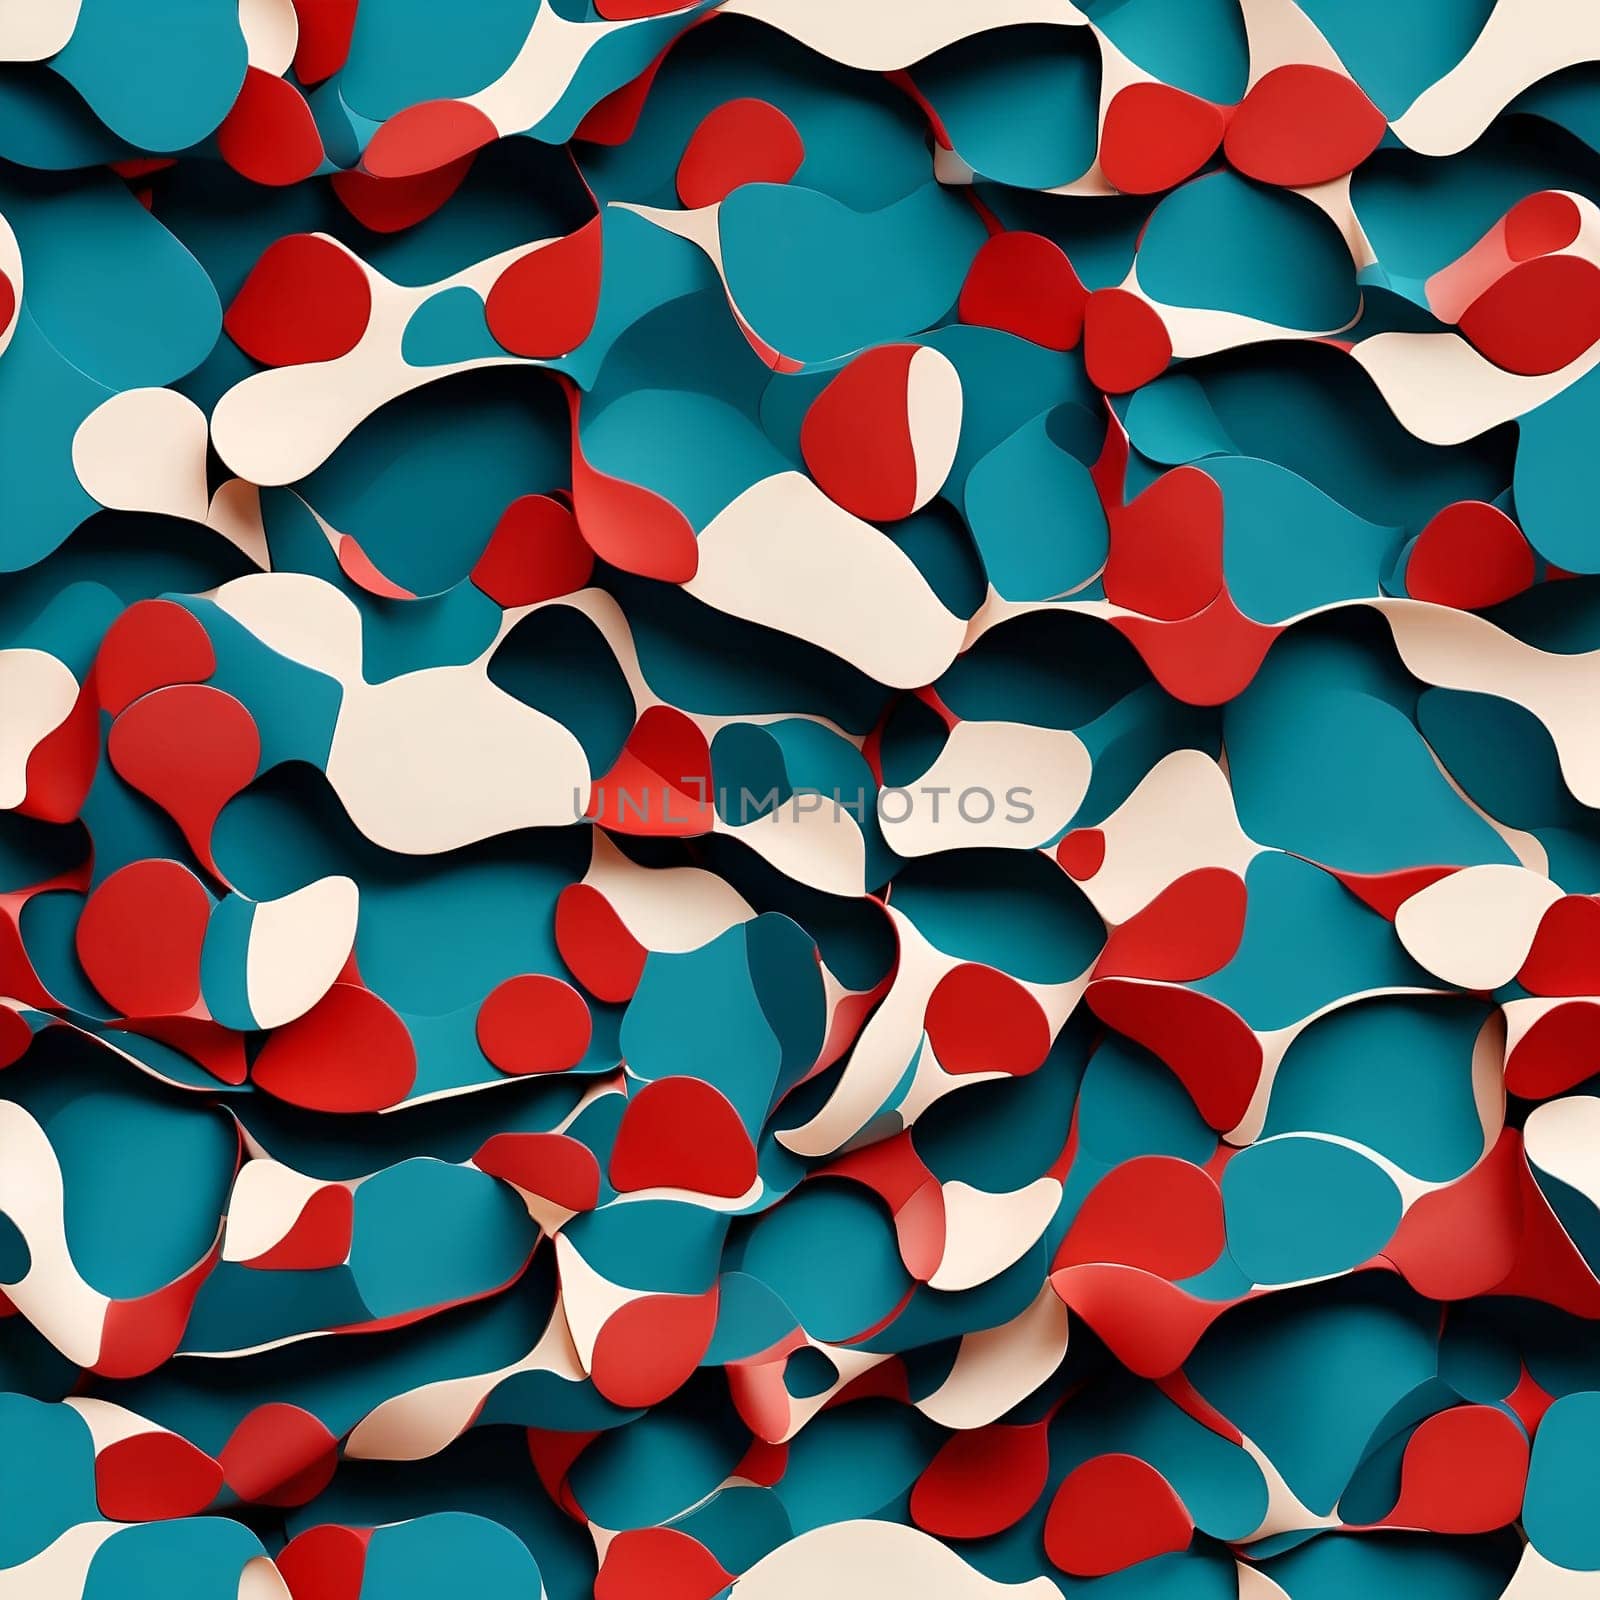 A seamless pattern featuring red and white hearts on a blue background.